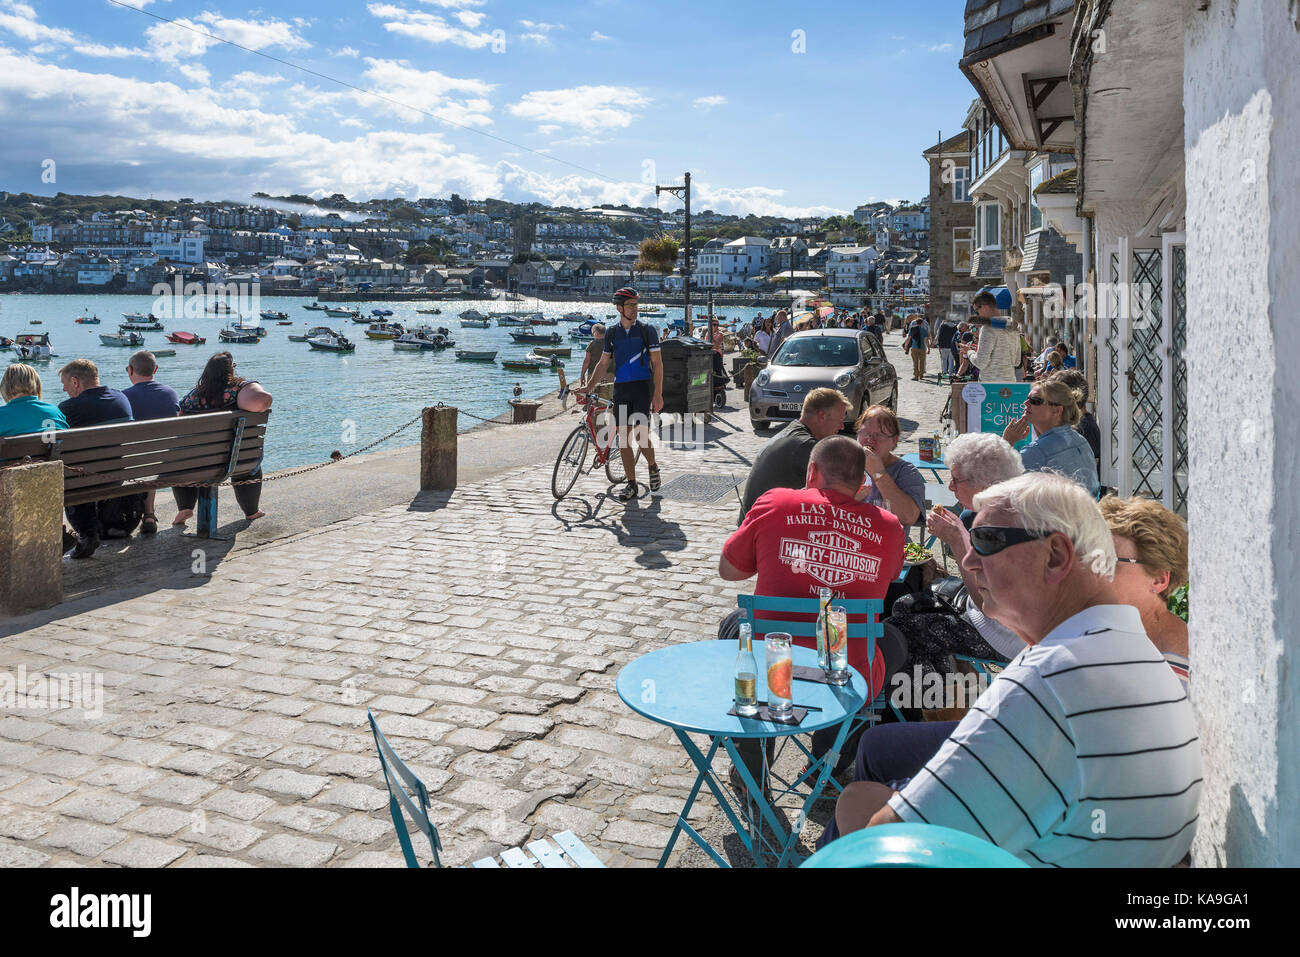 St ives - vacanzieri relax su harbourside a St ives Harbour in Cornovaglia. Foto Stock